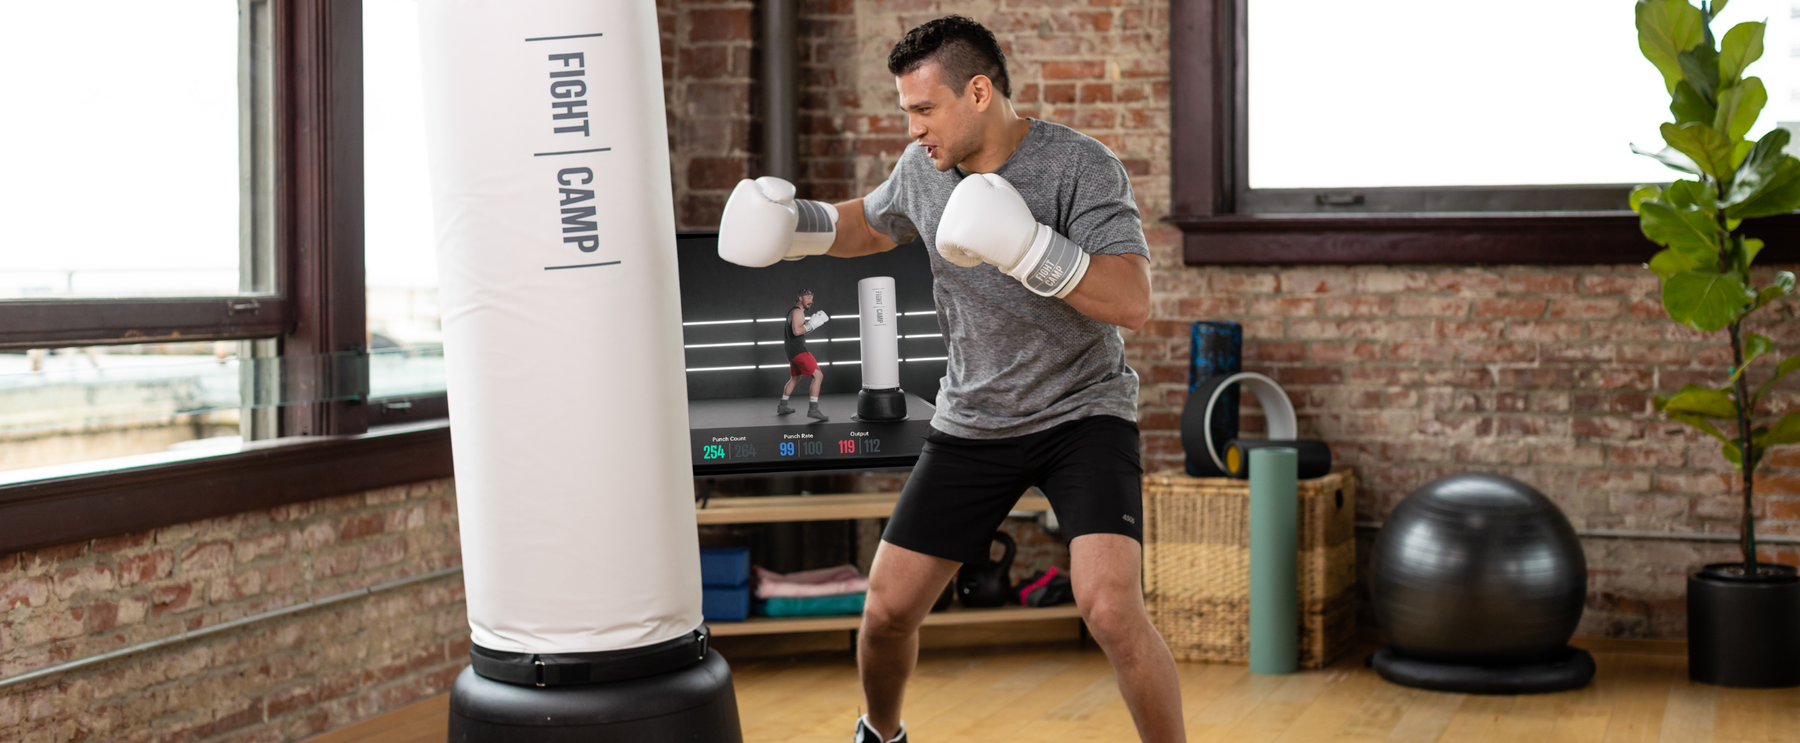 Step-By-Step: How To Set Up Your Home FightCamp Boxing Gym